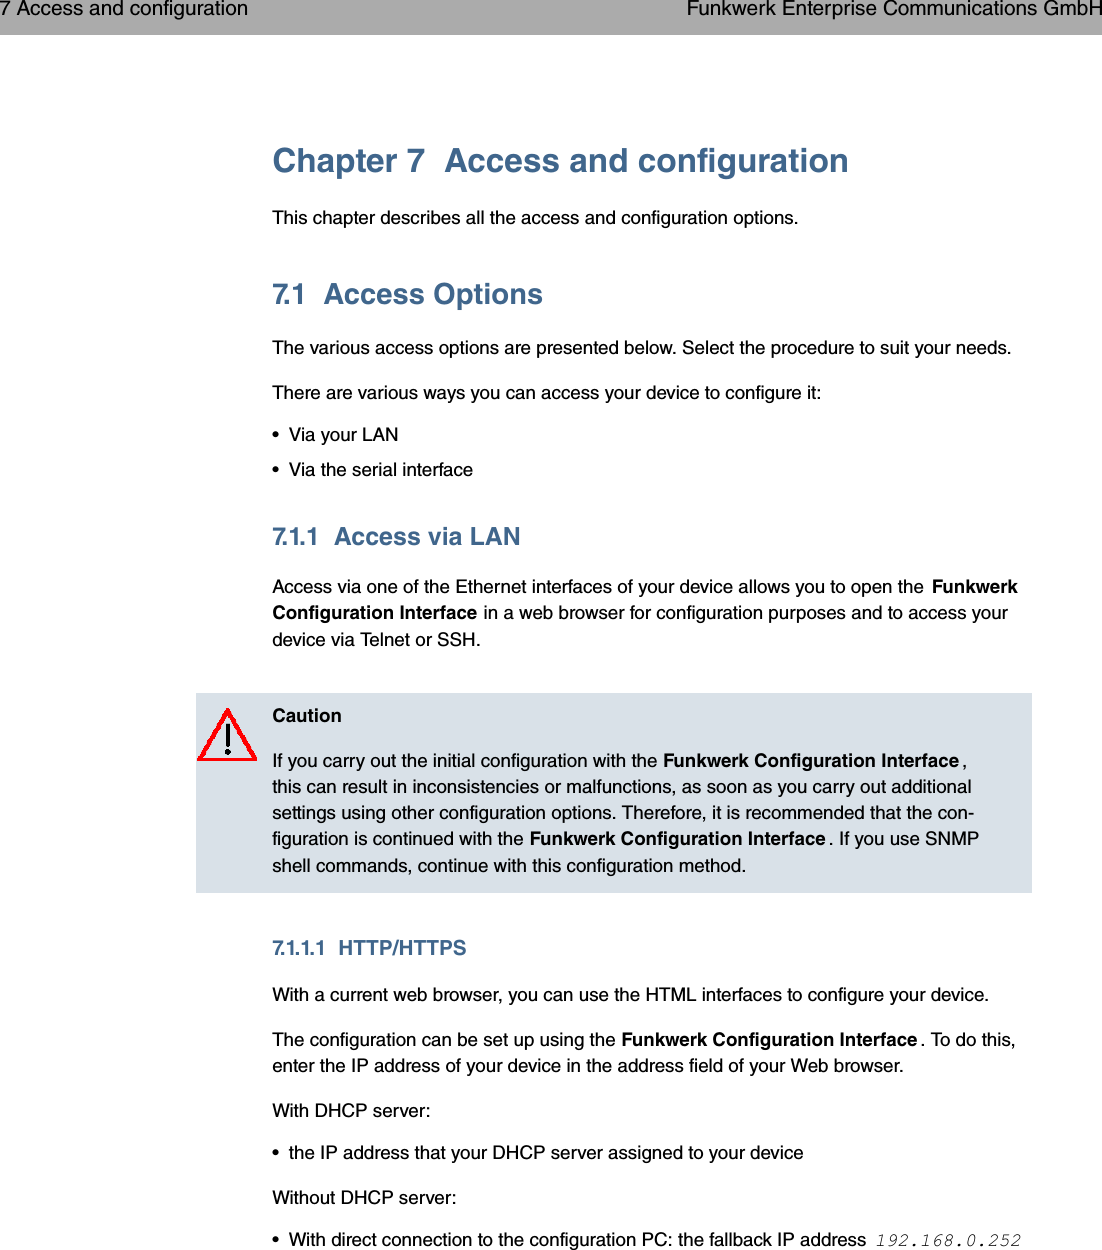 Chapter 7 Access and configurationThis chapter describes all the access and configuration options.7.1 Access OptionsThe various access options are presented below. Select the procedure to suit your needs.There are various ways you can access your device to configure it:• Via your LAN• Via the serial interface7.1.1 Access via LANAccess via one of the Ethernet interfaces of your device allows you to open the FunkwerkConfiguration Interface in a web browser for configuration purposes and to access yourdevice via Telnet or SSH.CautionIf you carry out the initial configuration with the Funkwerk Configuration Interface ,this can result in inconsistencies or malfunctions, as soon as you carry out additionalsettings using other configuration options. Therefore, it is recommended that the con-figuration is continued with the Funkwerk Configuration Interface . If you use SNMPshell commands, continue with this configuration method.7.1.1.1 HTTP/HTTPSWith a current web browser, you can use the HTML interfaces to configure your device.The configuration can be set up using the Funkwerk Configuration Interface . To do this,enter the IP address of your device in the address field of your Web browser.With DHCP server:• the IP address that your DHCP server assigned to your deviceWithout DHCP server:• With direct connection to the configuration PC: the fallback IP address 7 Access and configuration Funkwerk Enterprise Communications GmbH50 bintec WLAN and Industrial WLAN